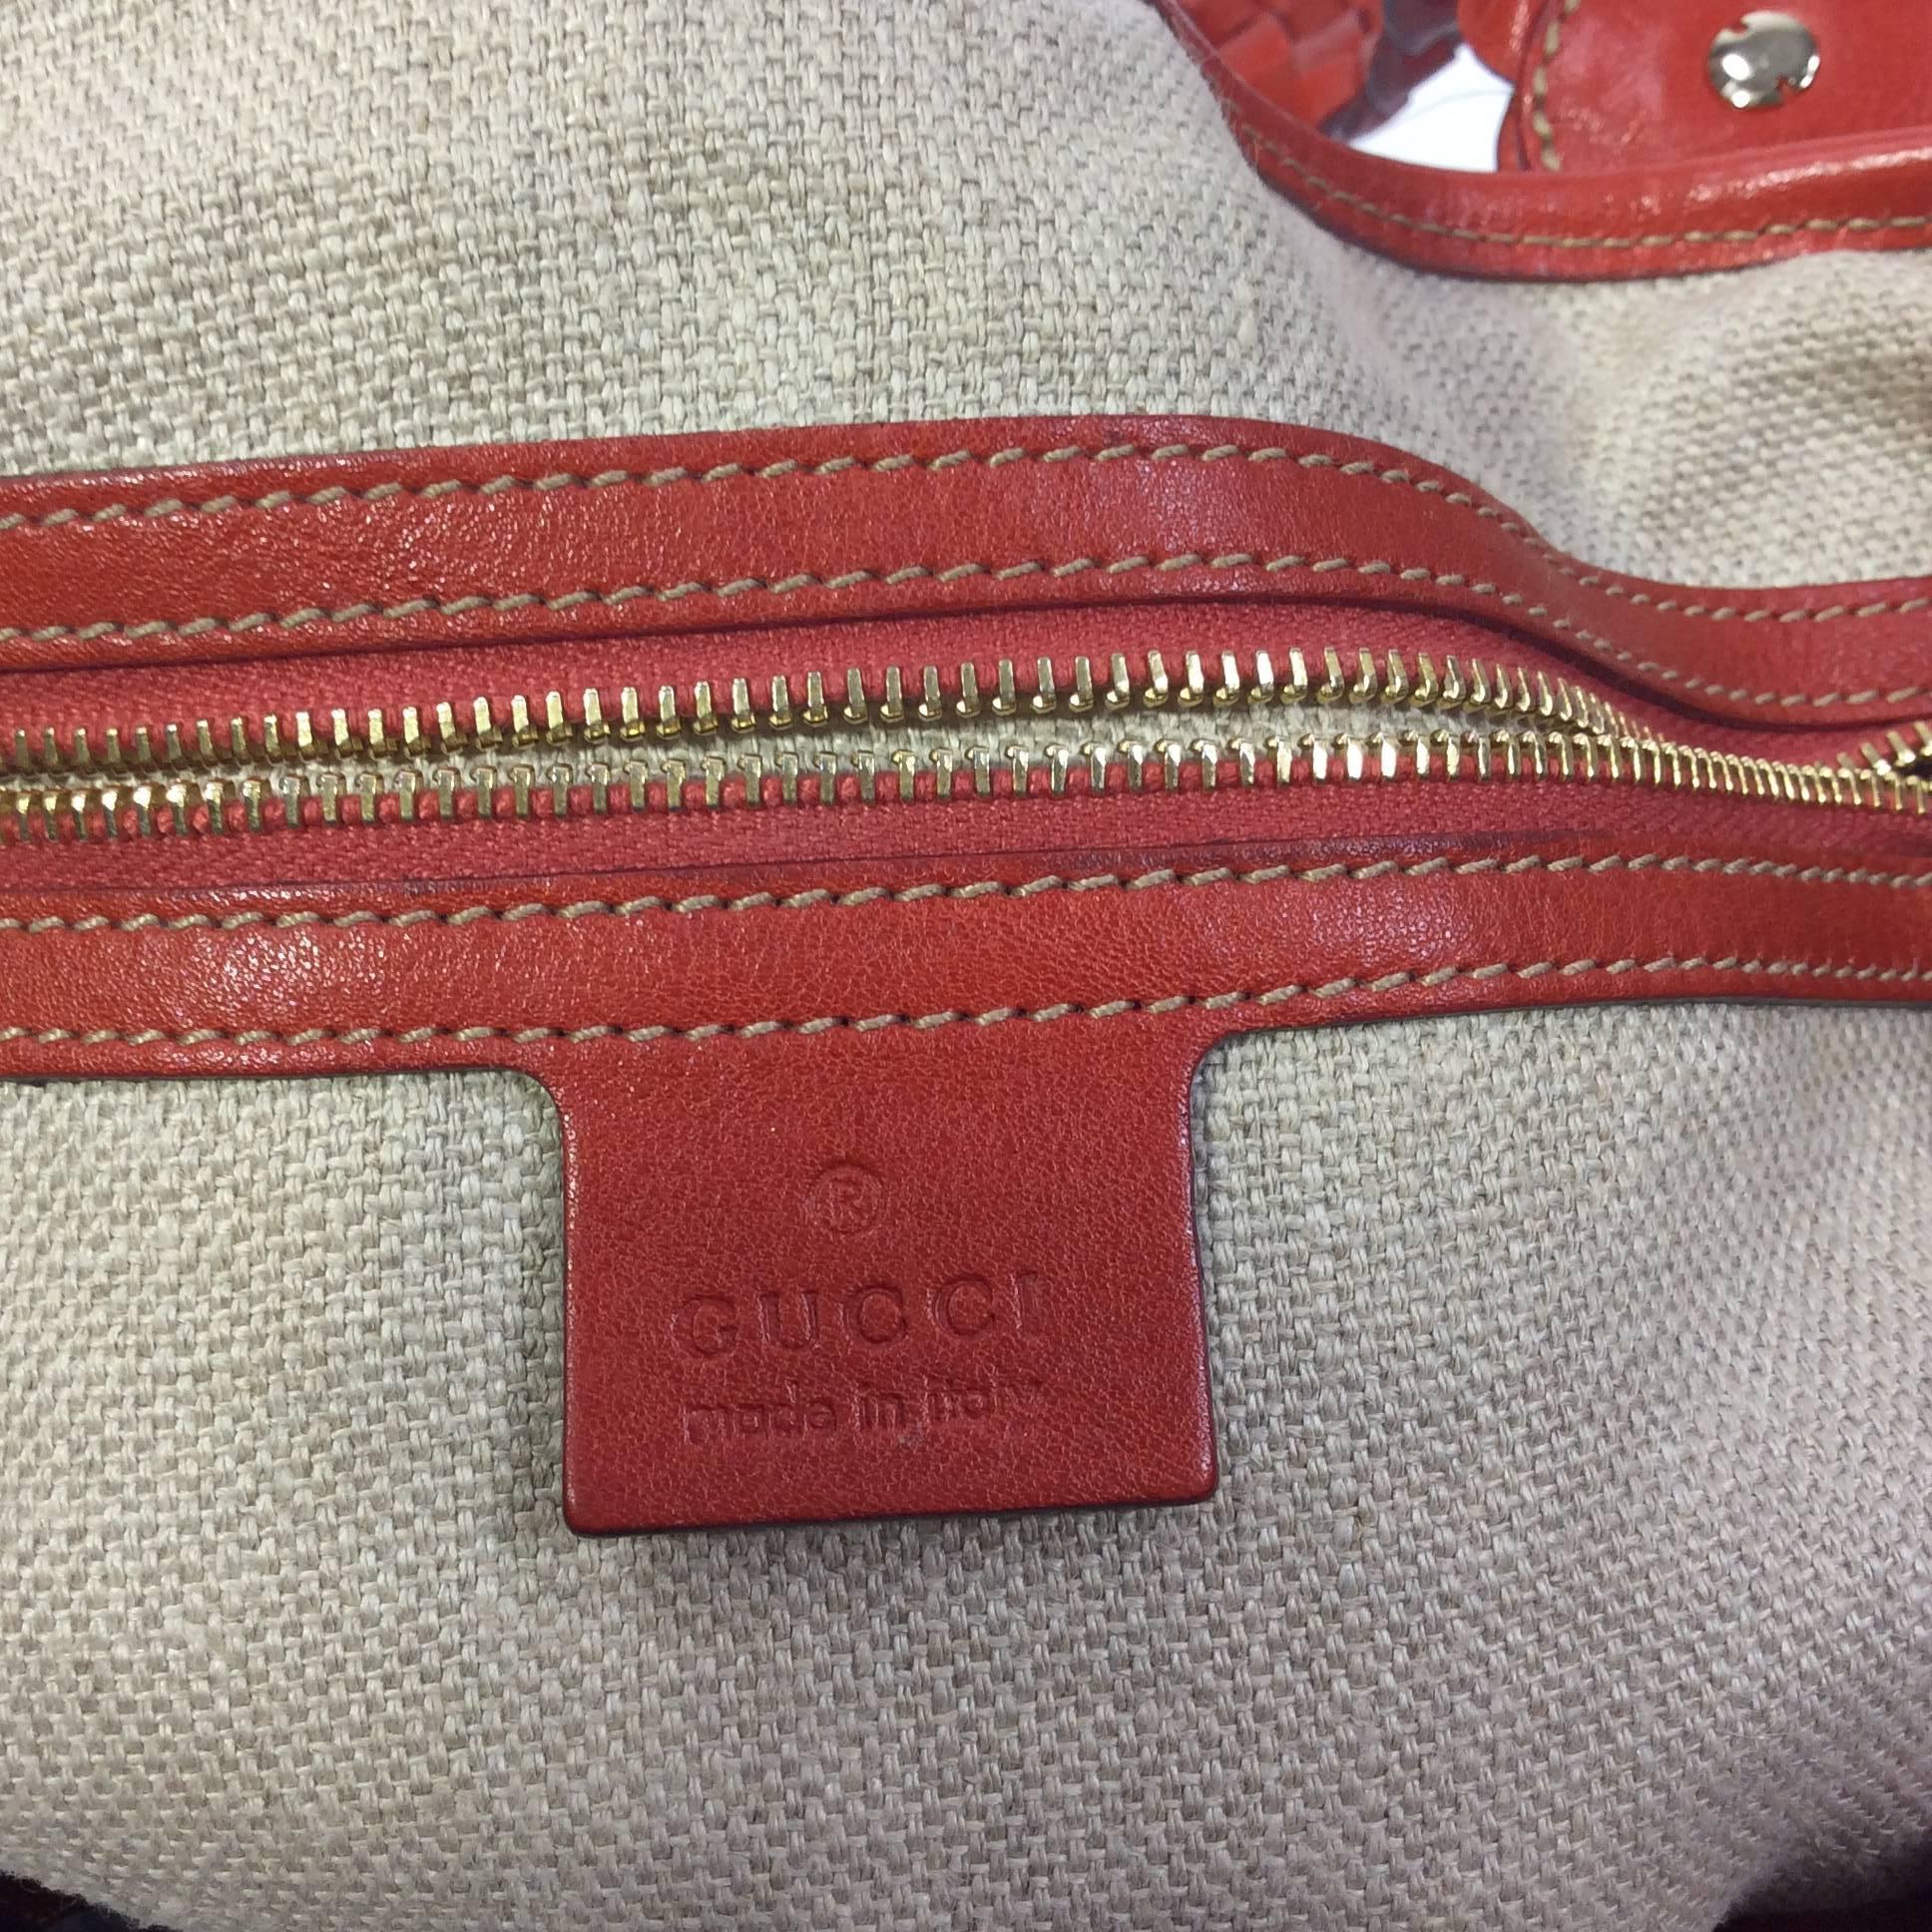 Gucci Tan Linen and Orange Braided Leather Handle Shoulder Bag In Excellent Condition For Sale In Narberth, PA